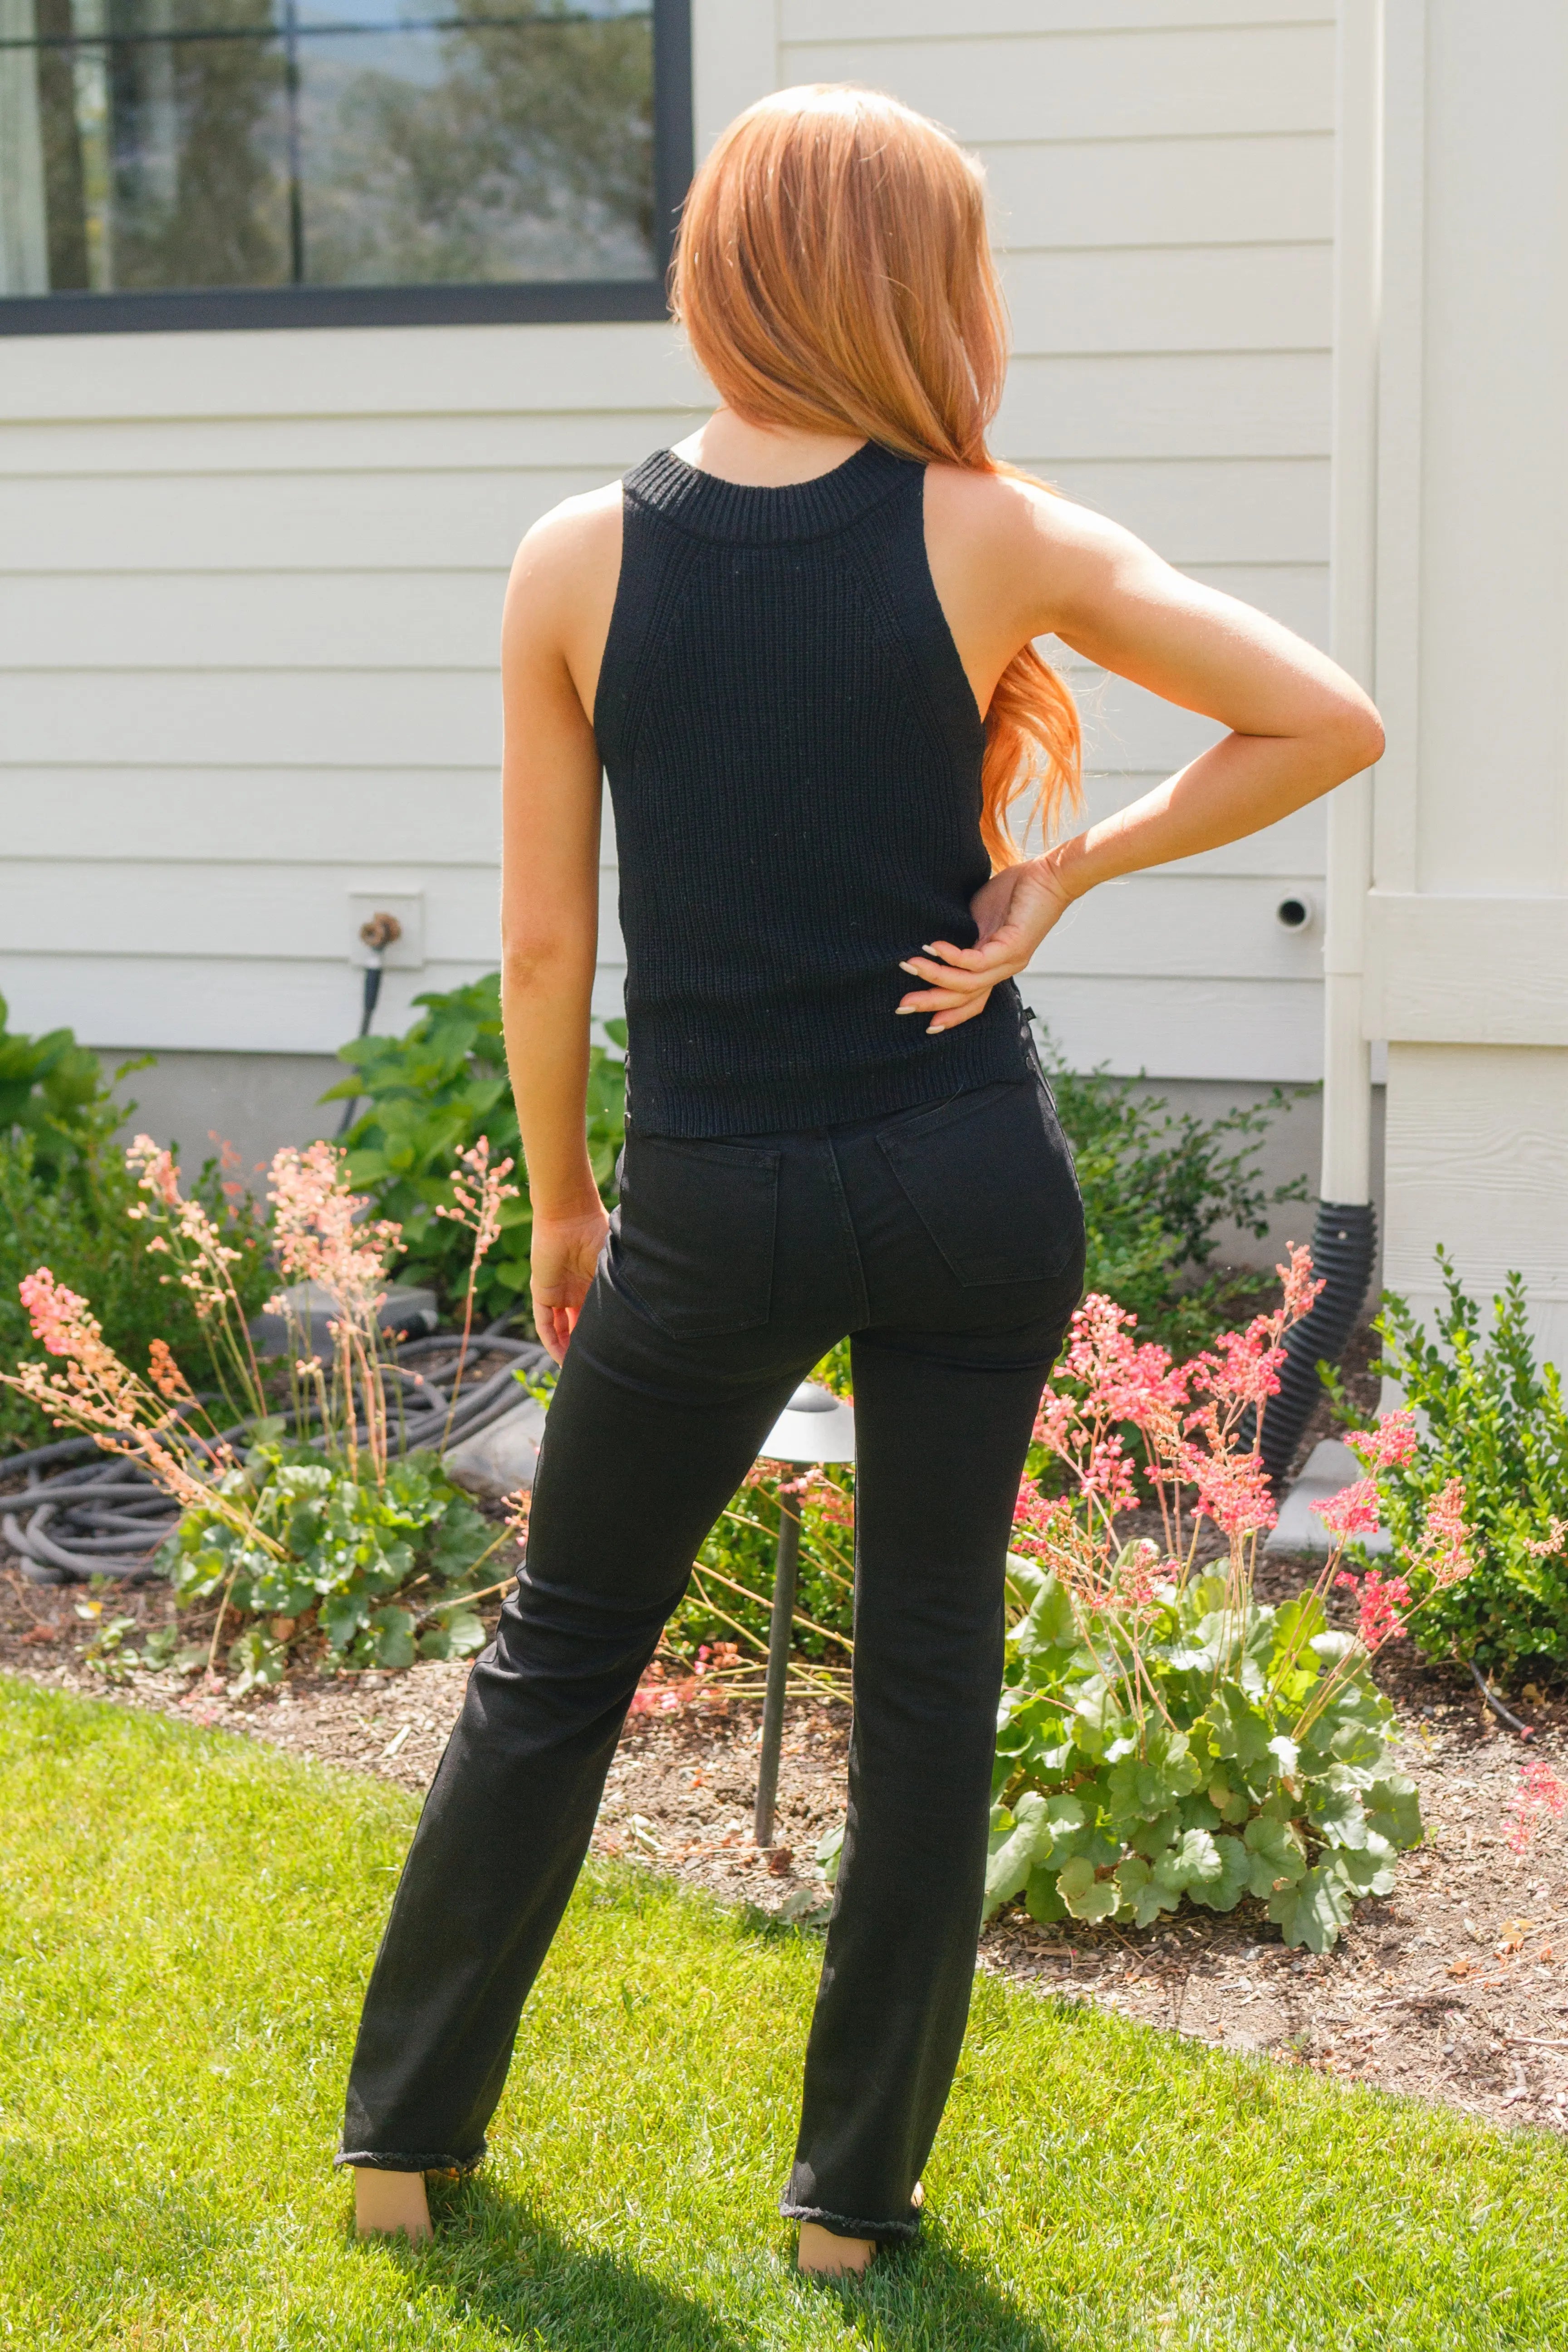 Previous Engagement Halter Neck Sweater Tank in Black Ave Shops